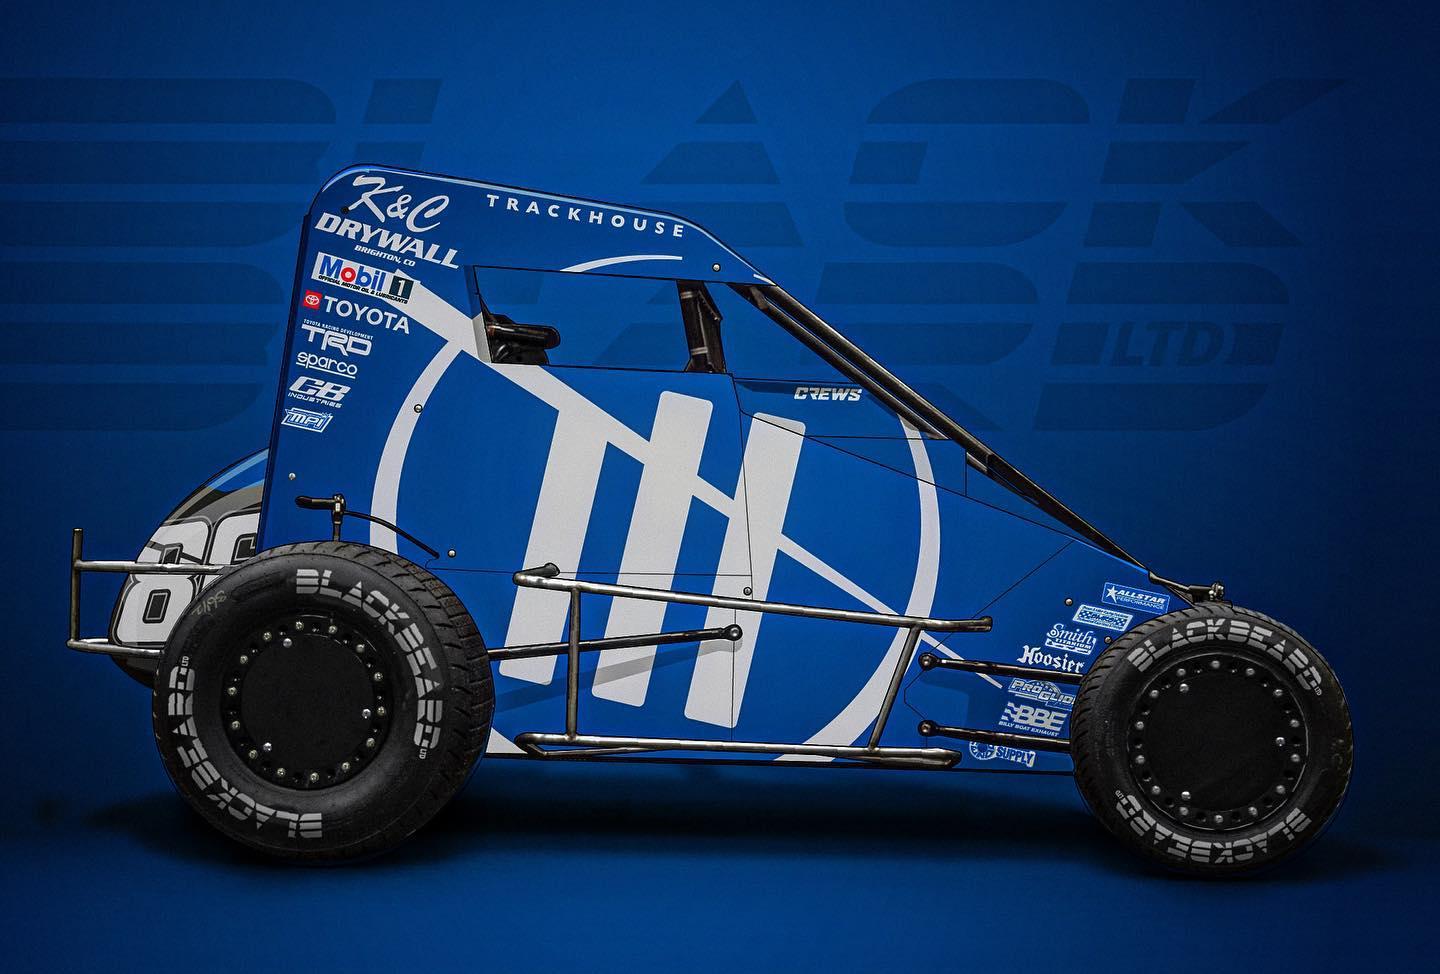 Preview of Brent Crews 2022 trackhouse chili bowl midget numbered by Gage Stevens